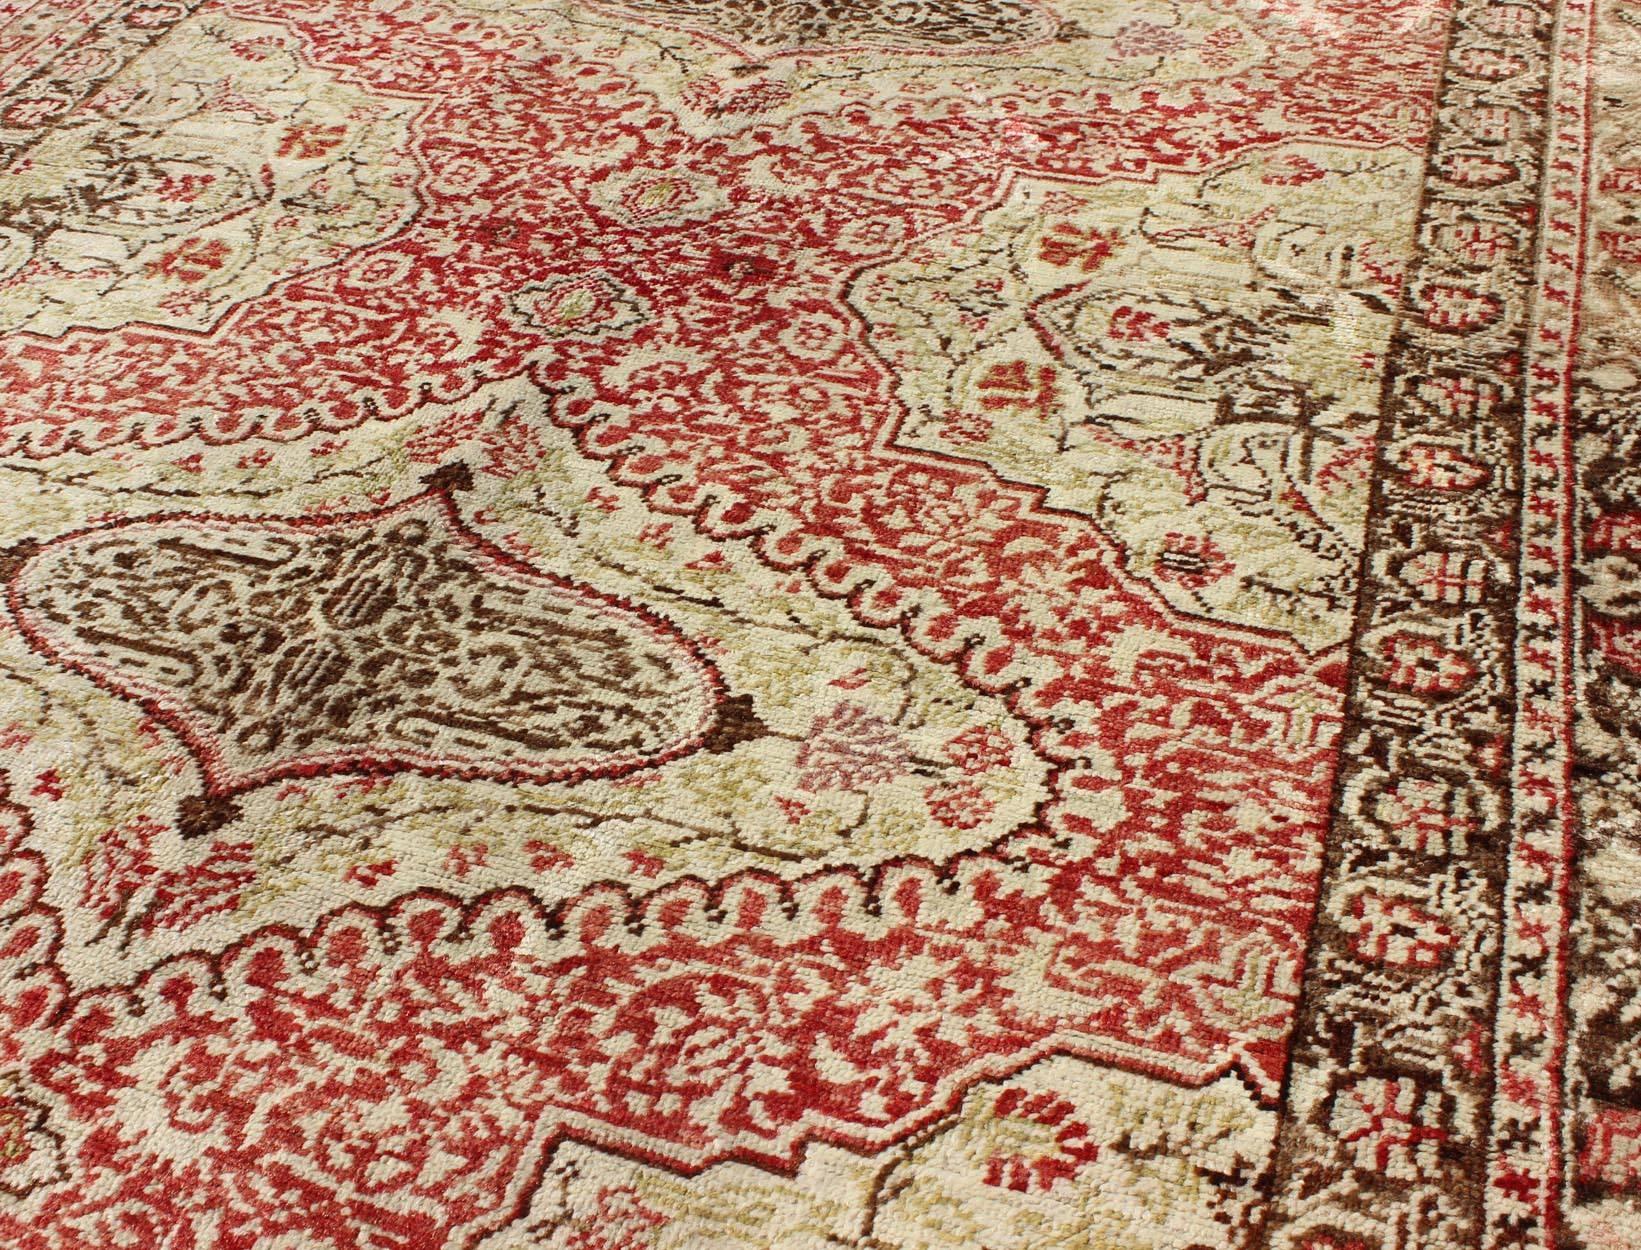 Fine Turkish Sivas Rug with Classic Medallion Design in Red, Ivory and Green In Excellent Condition For Sale In Atlanta, GA